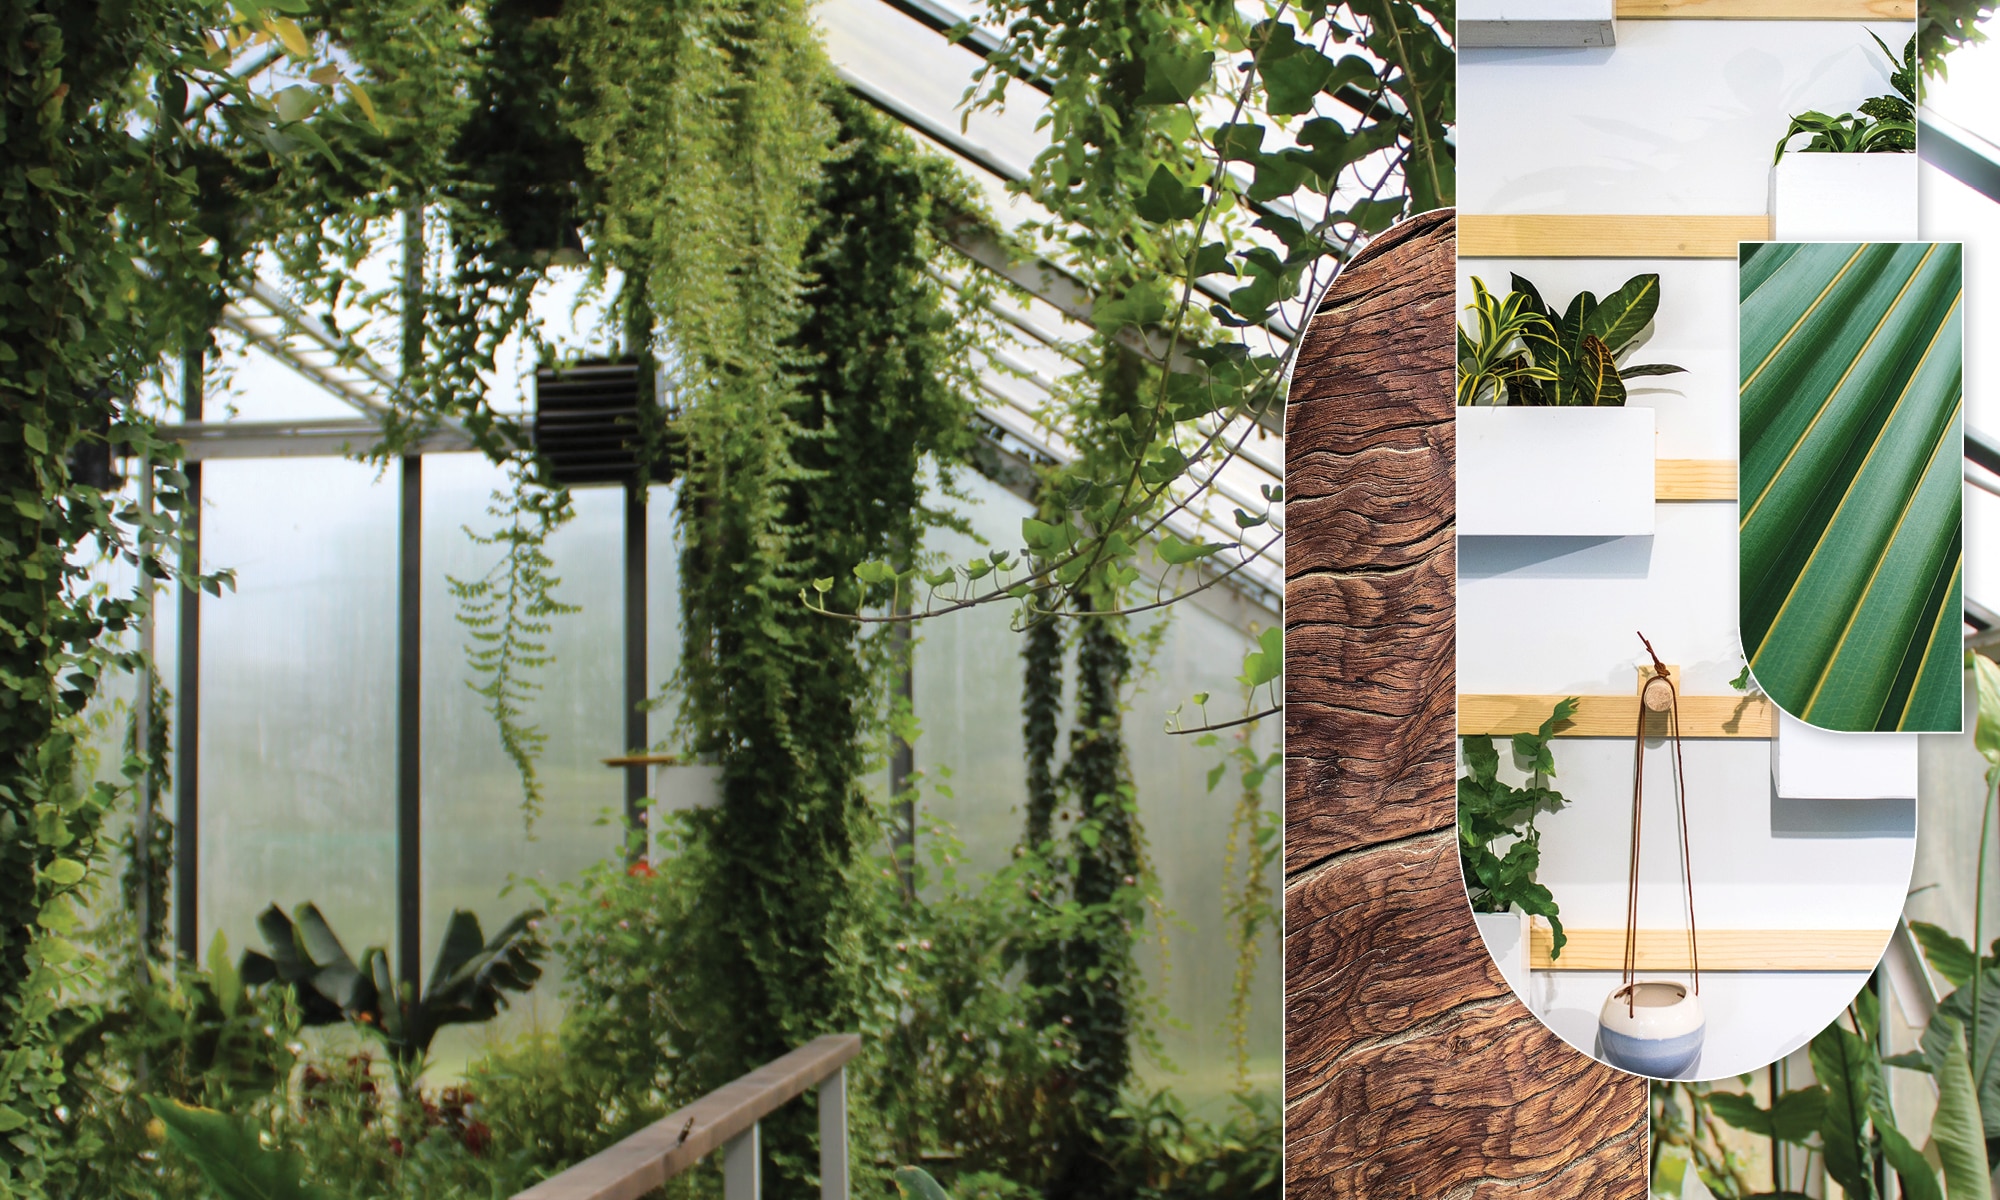 Biophilic Essence mood board with hanging plants and tree trunks.